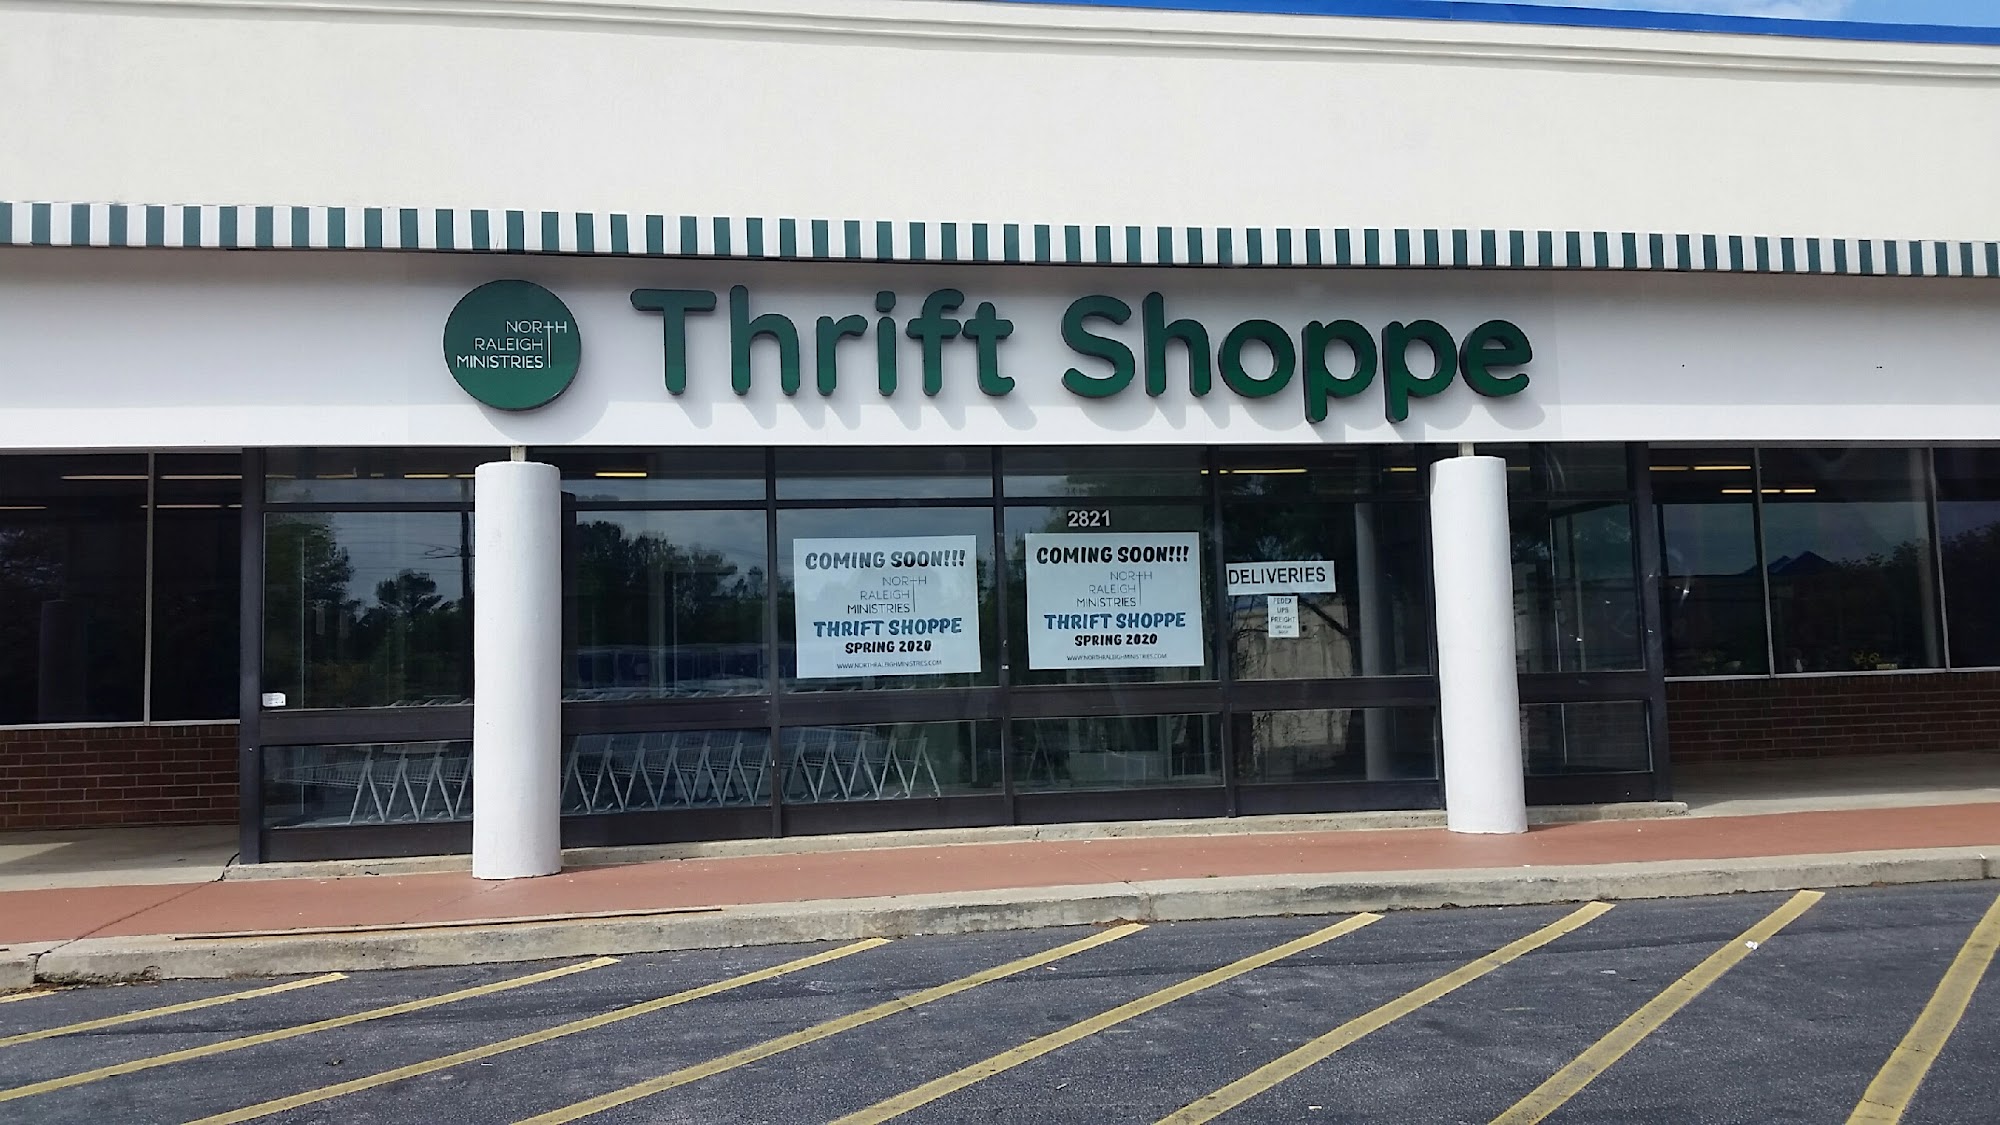 North Raleigh Ministries Thrift Shoppe- Stony Brook